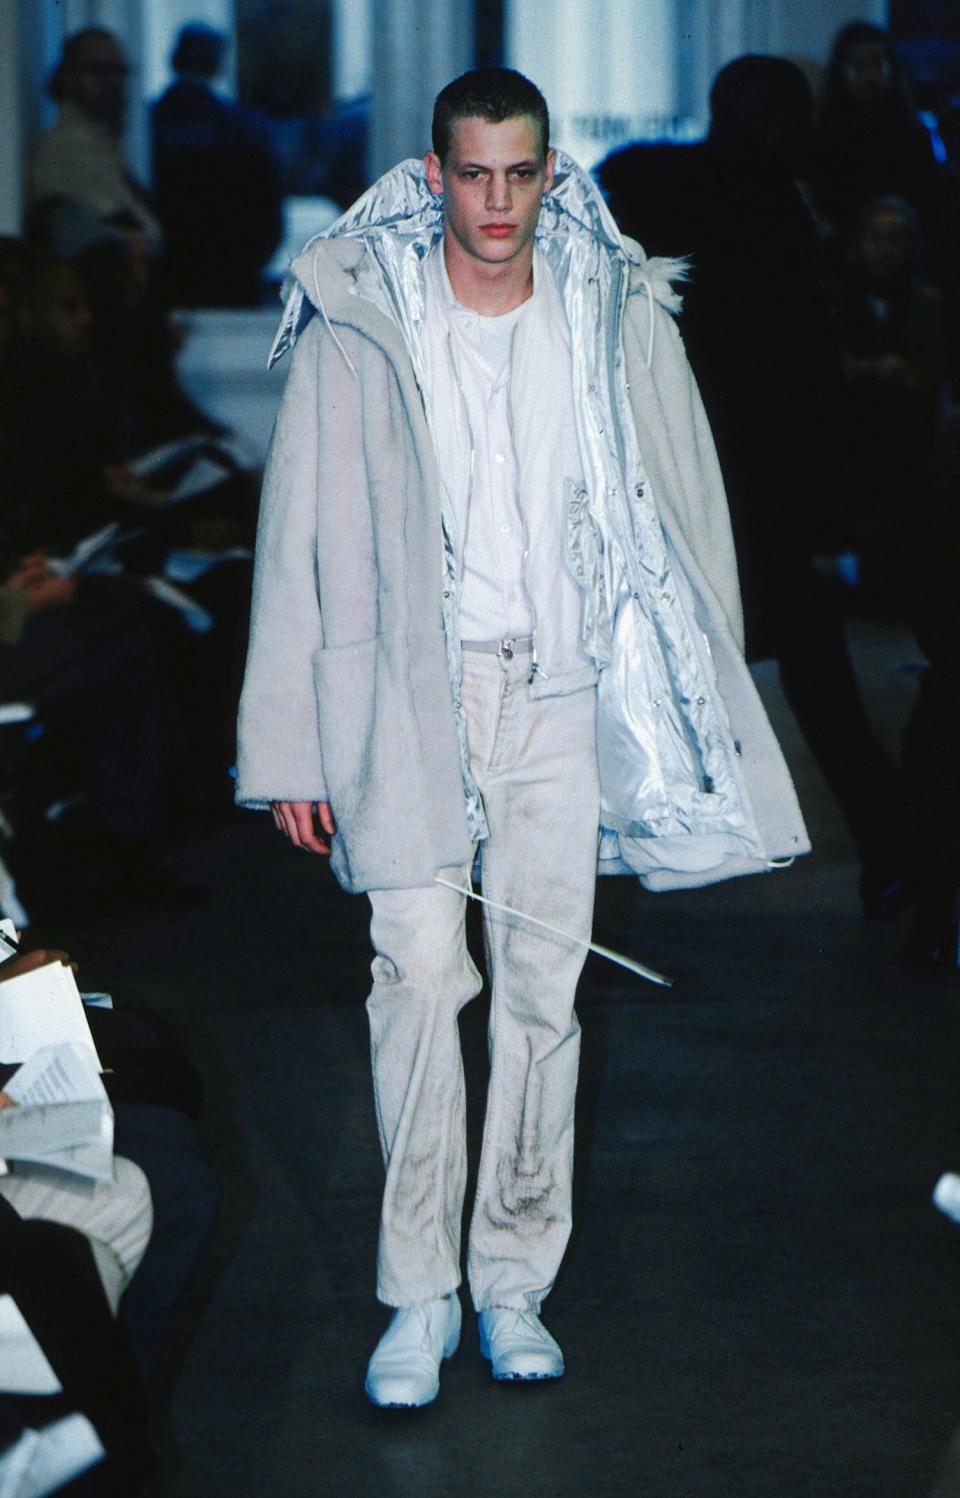 From Helmut Lang’s fall-winter ’98 show: the reflective fishtail parka, styled for the runway.